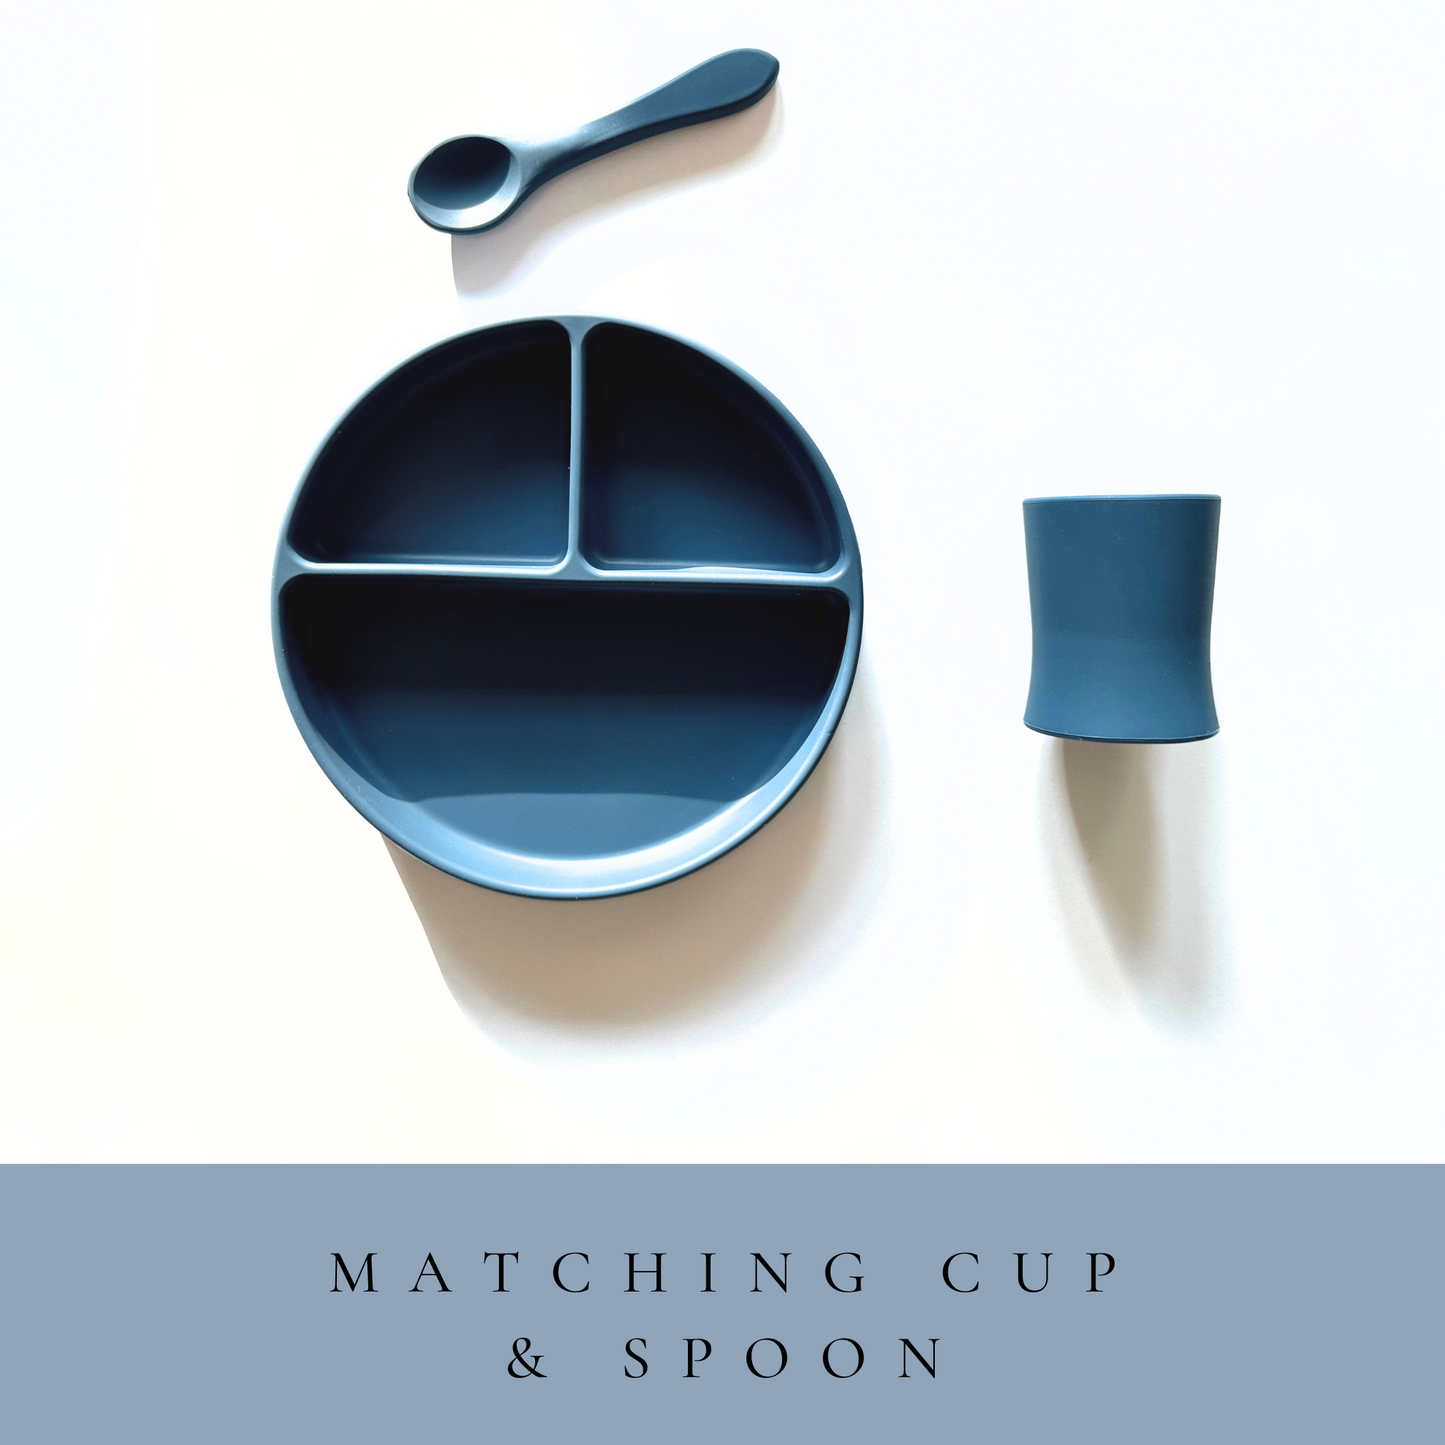 Silicone Suction Divided Plate with Matching Cup and Spoon